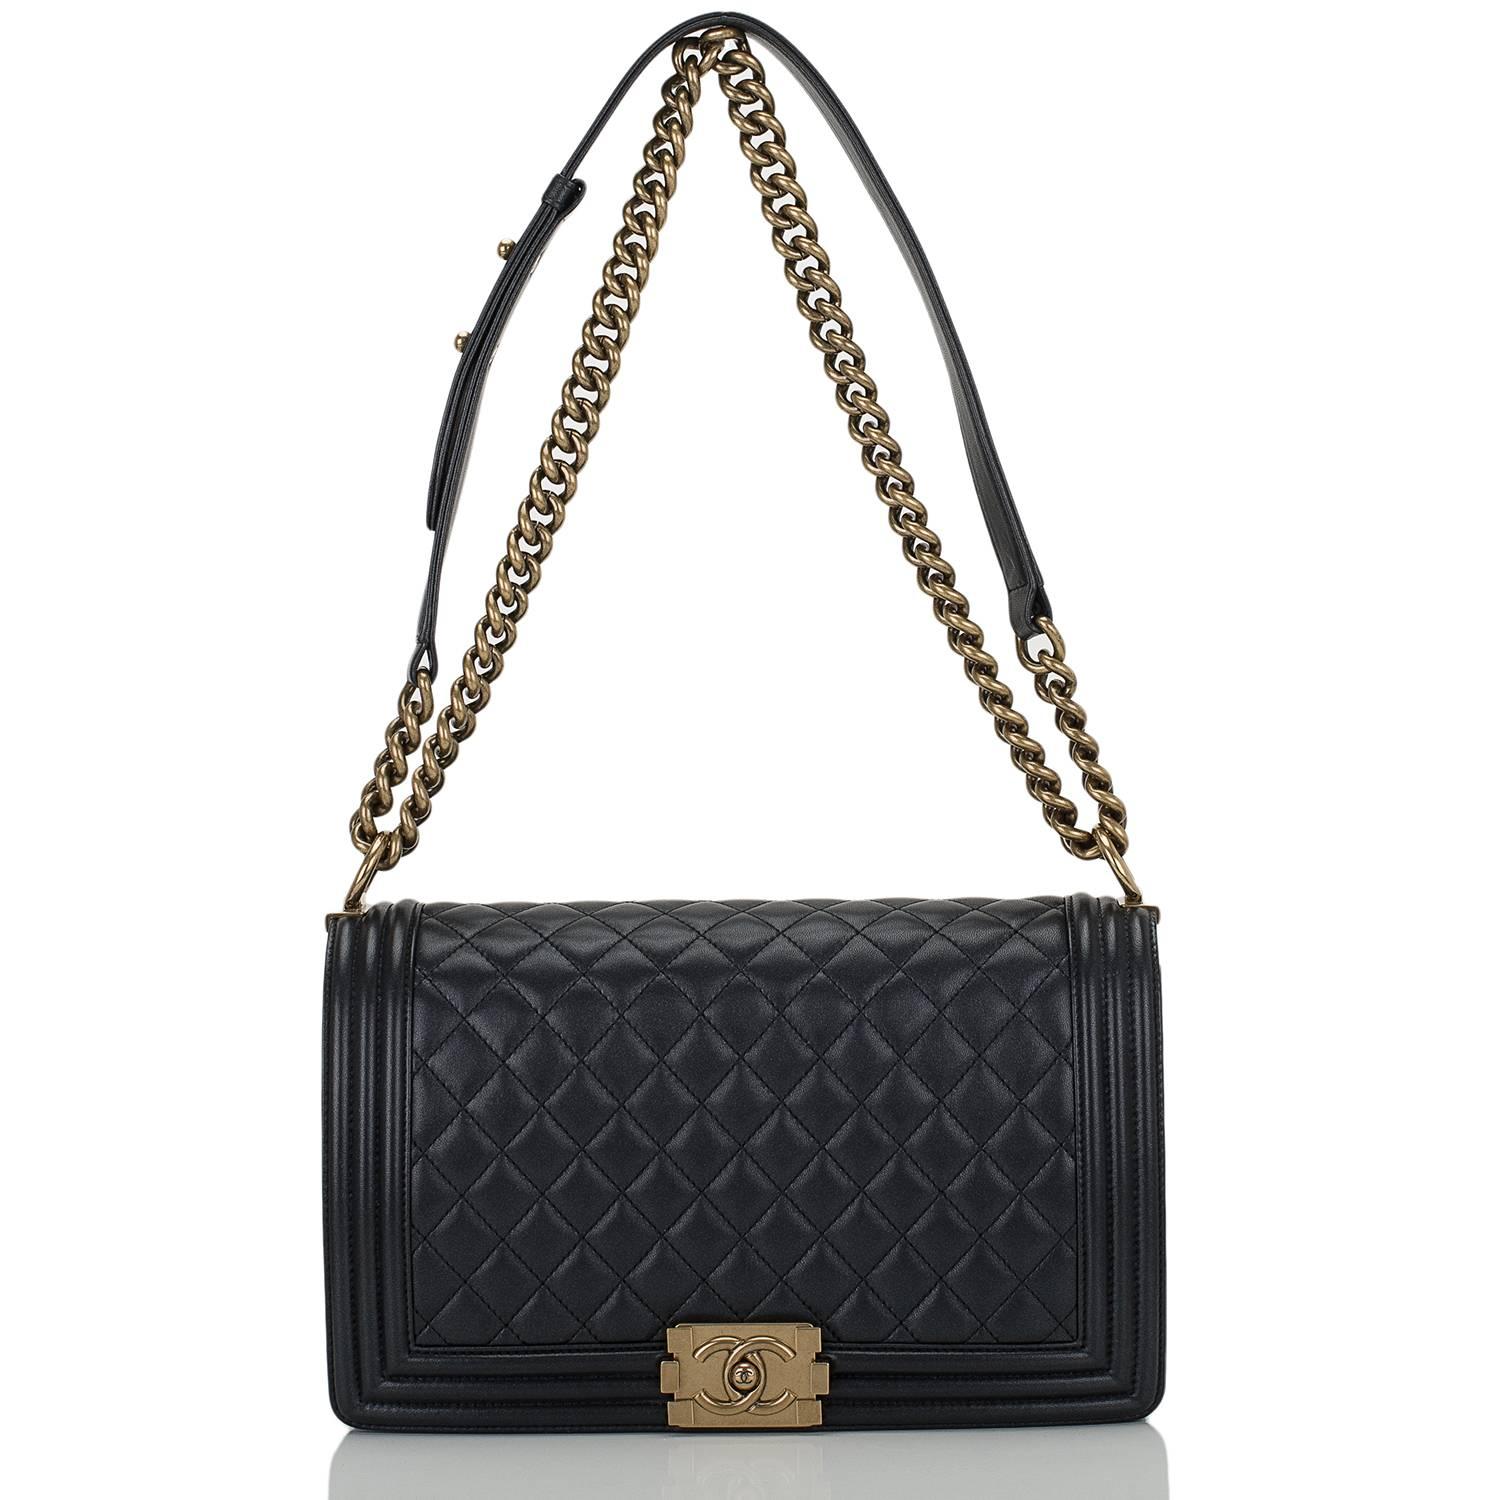 Women's Chanel Black Pearly Quilted Lambskin Large Boy Bag